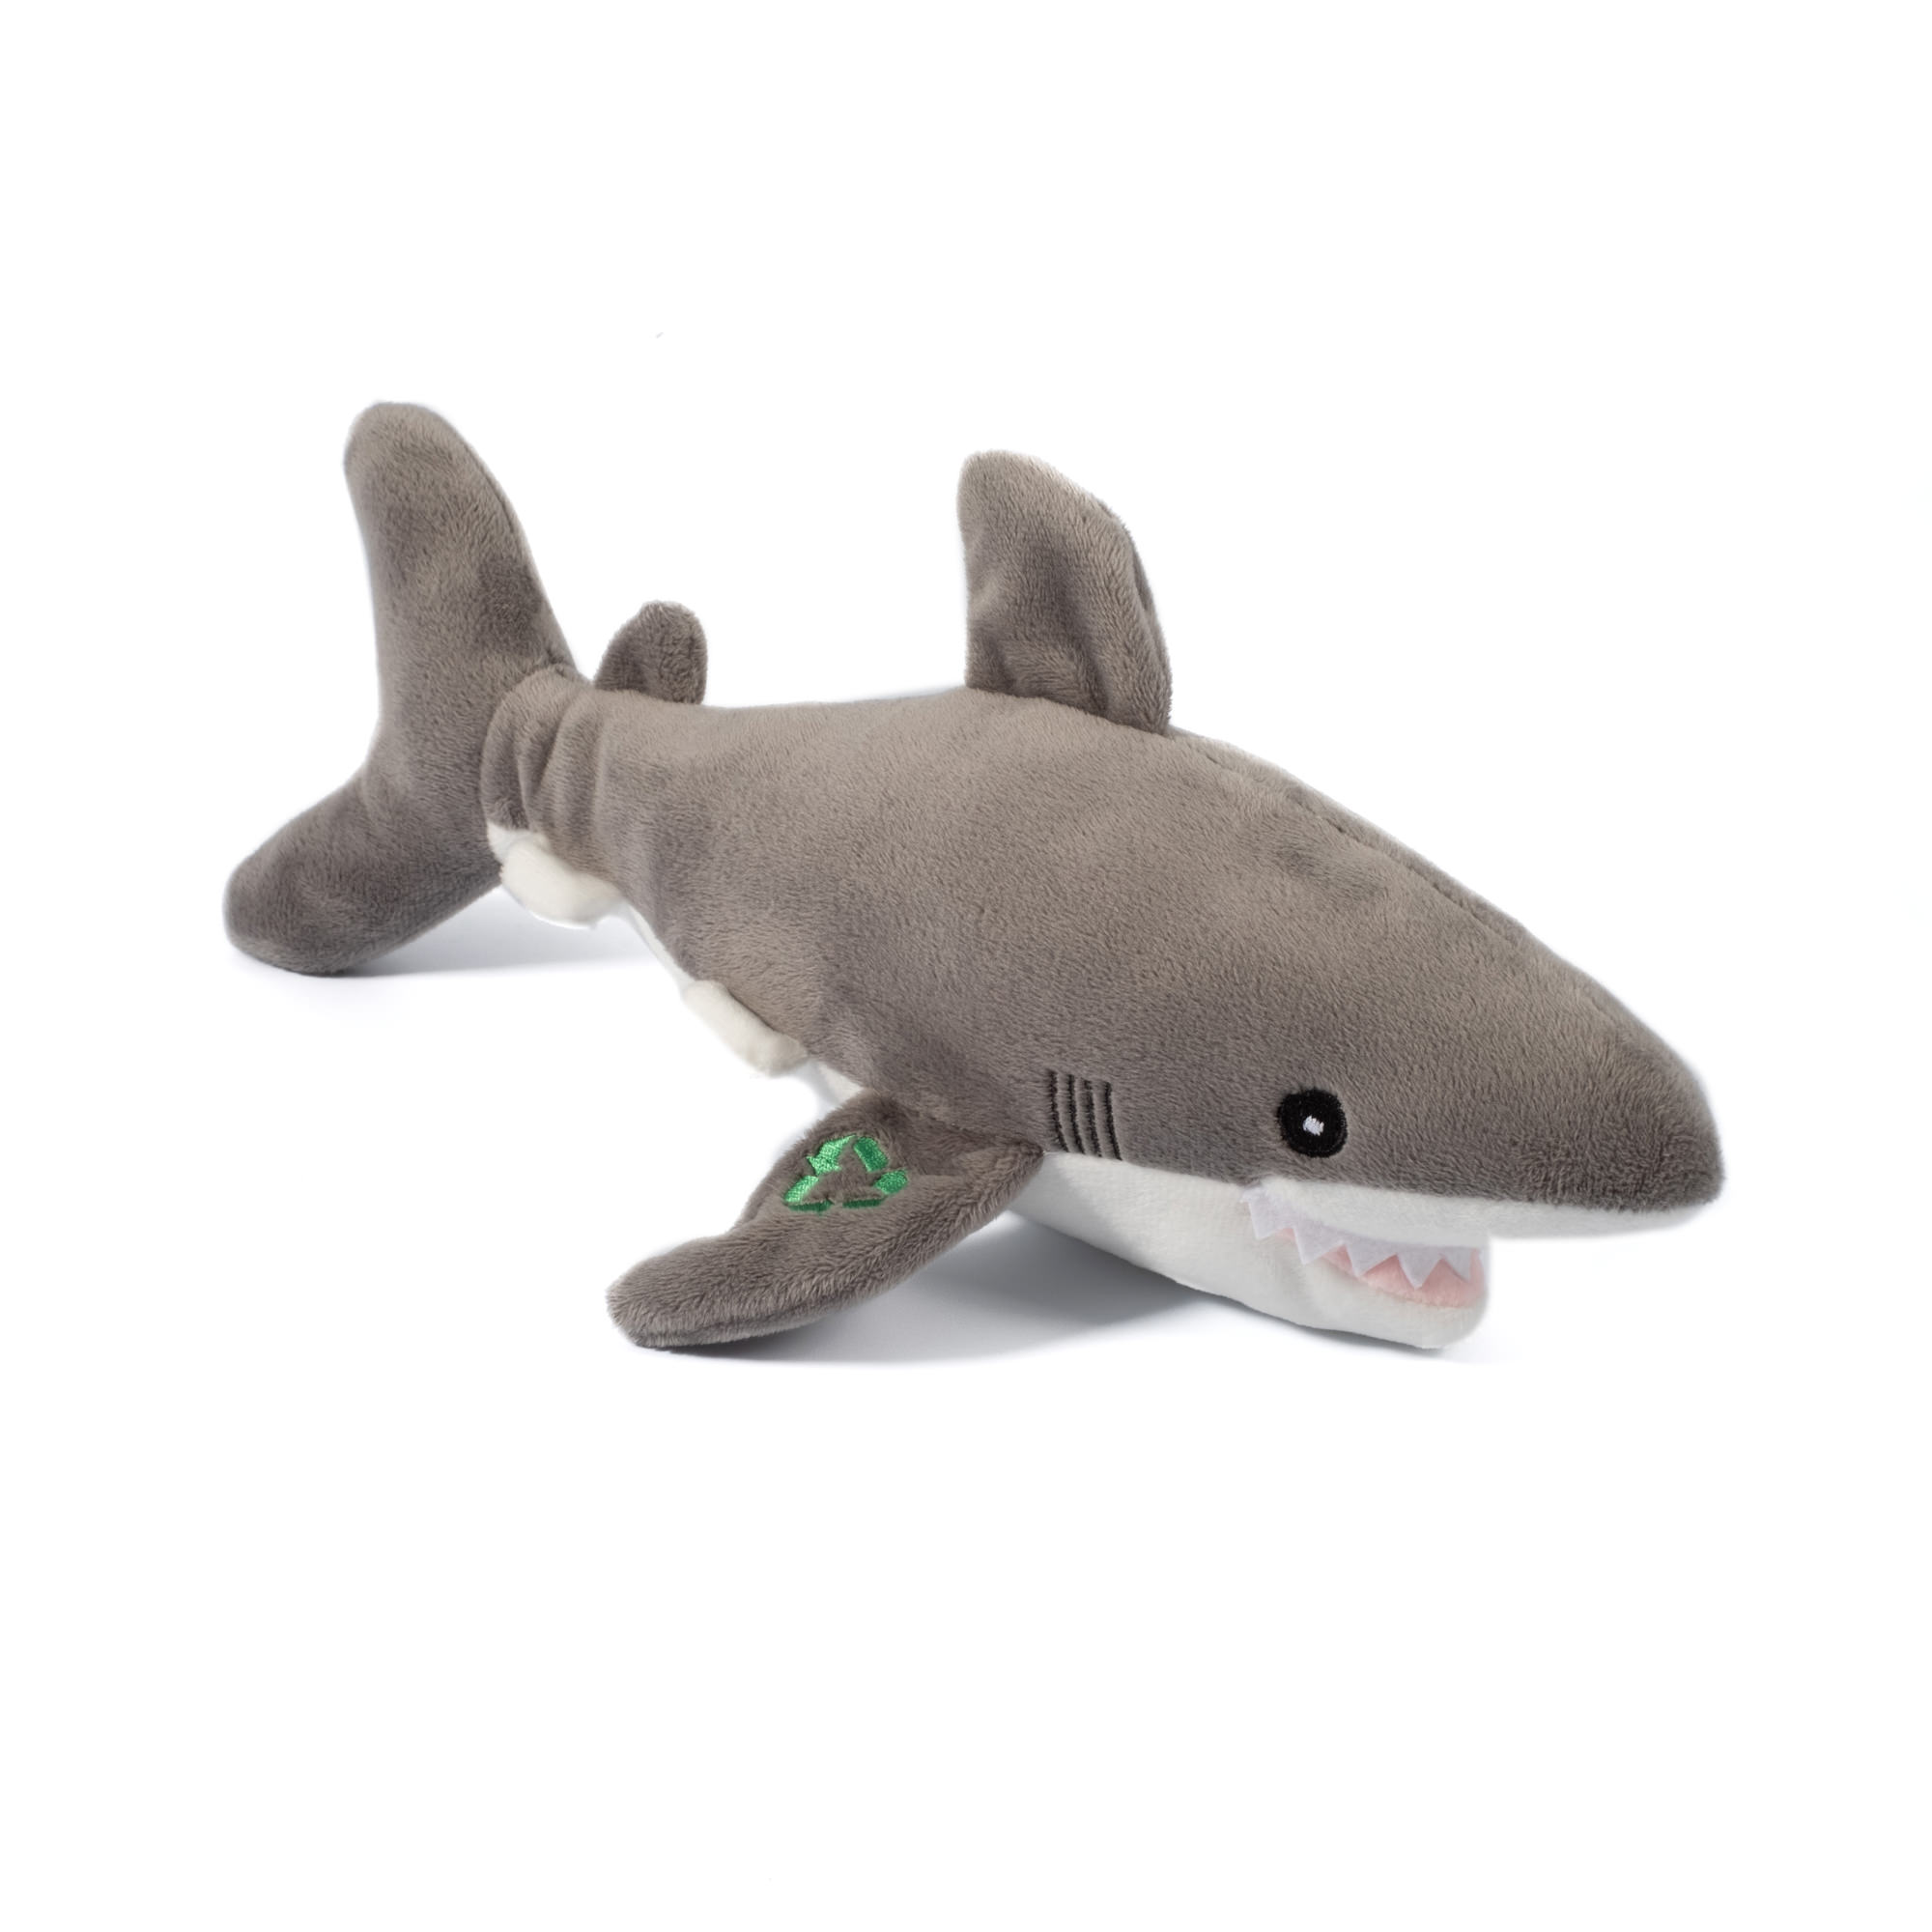 Made From Shark Dog Toy